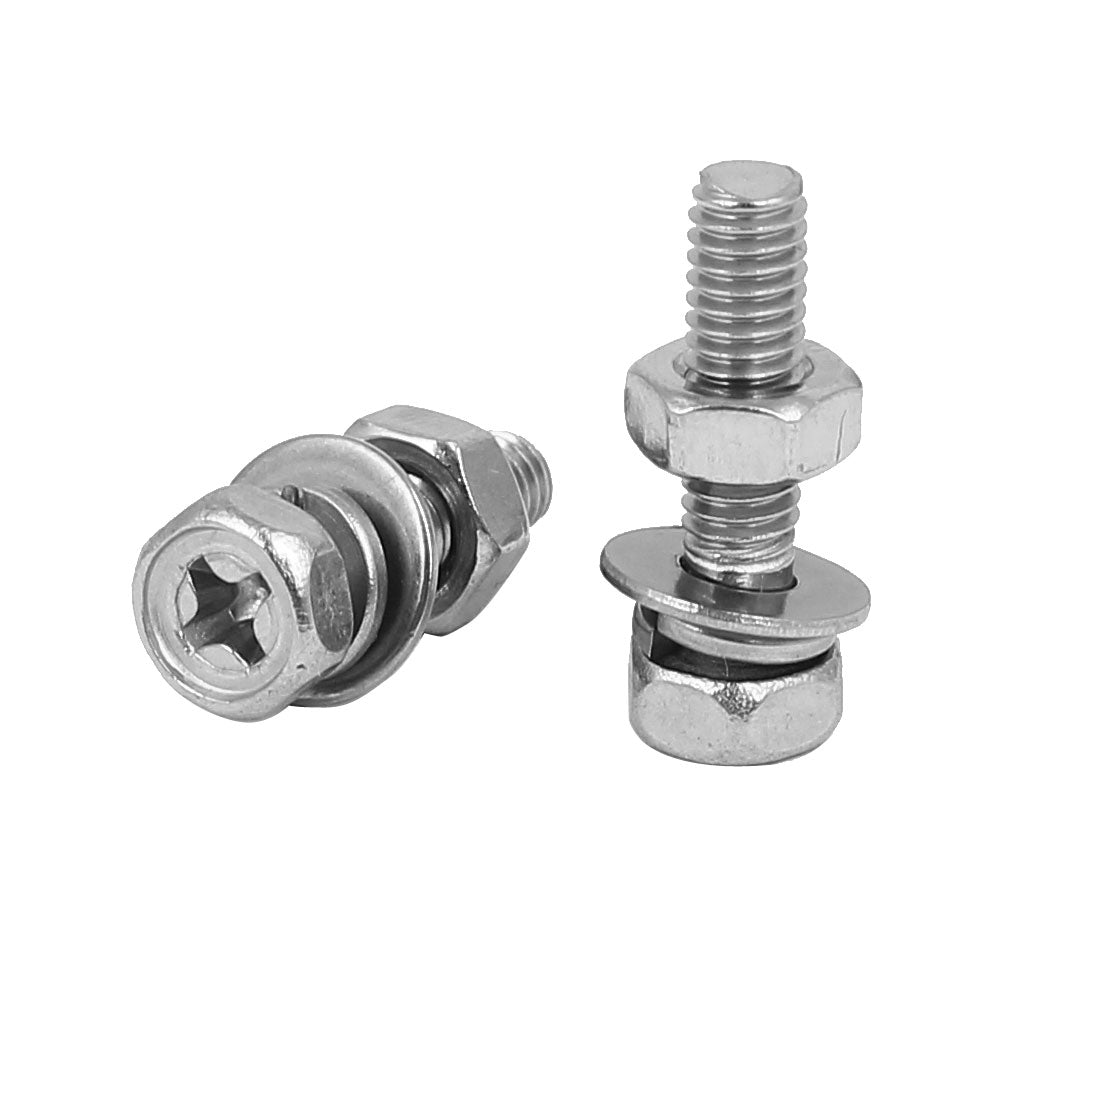 uxcell Uxcell M4 x 16mm 304 Stainless Steel Phillips Hex Head Bolts Nuts w Washers 20 Sets